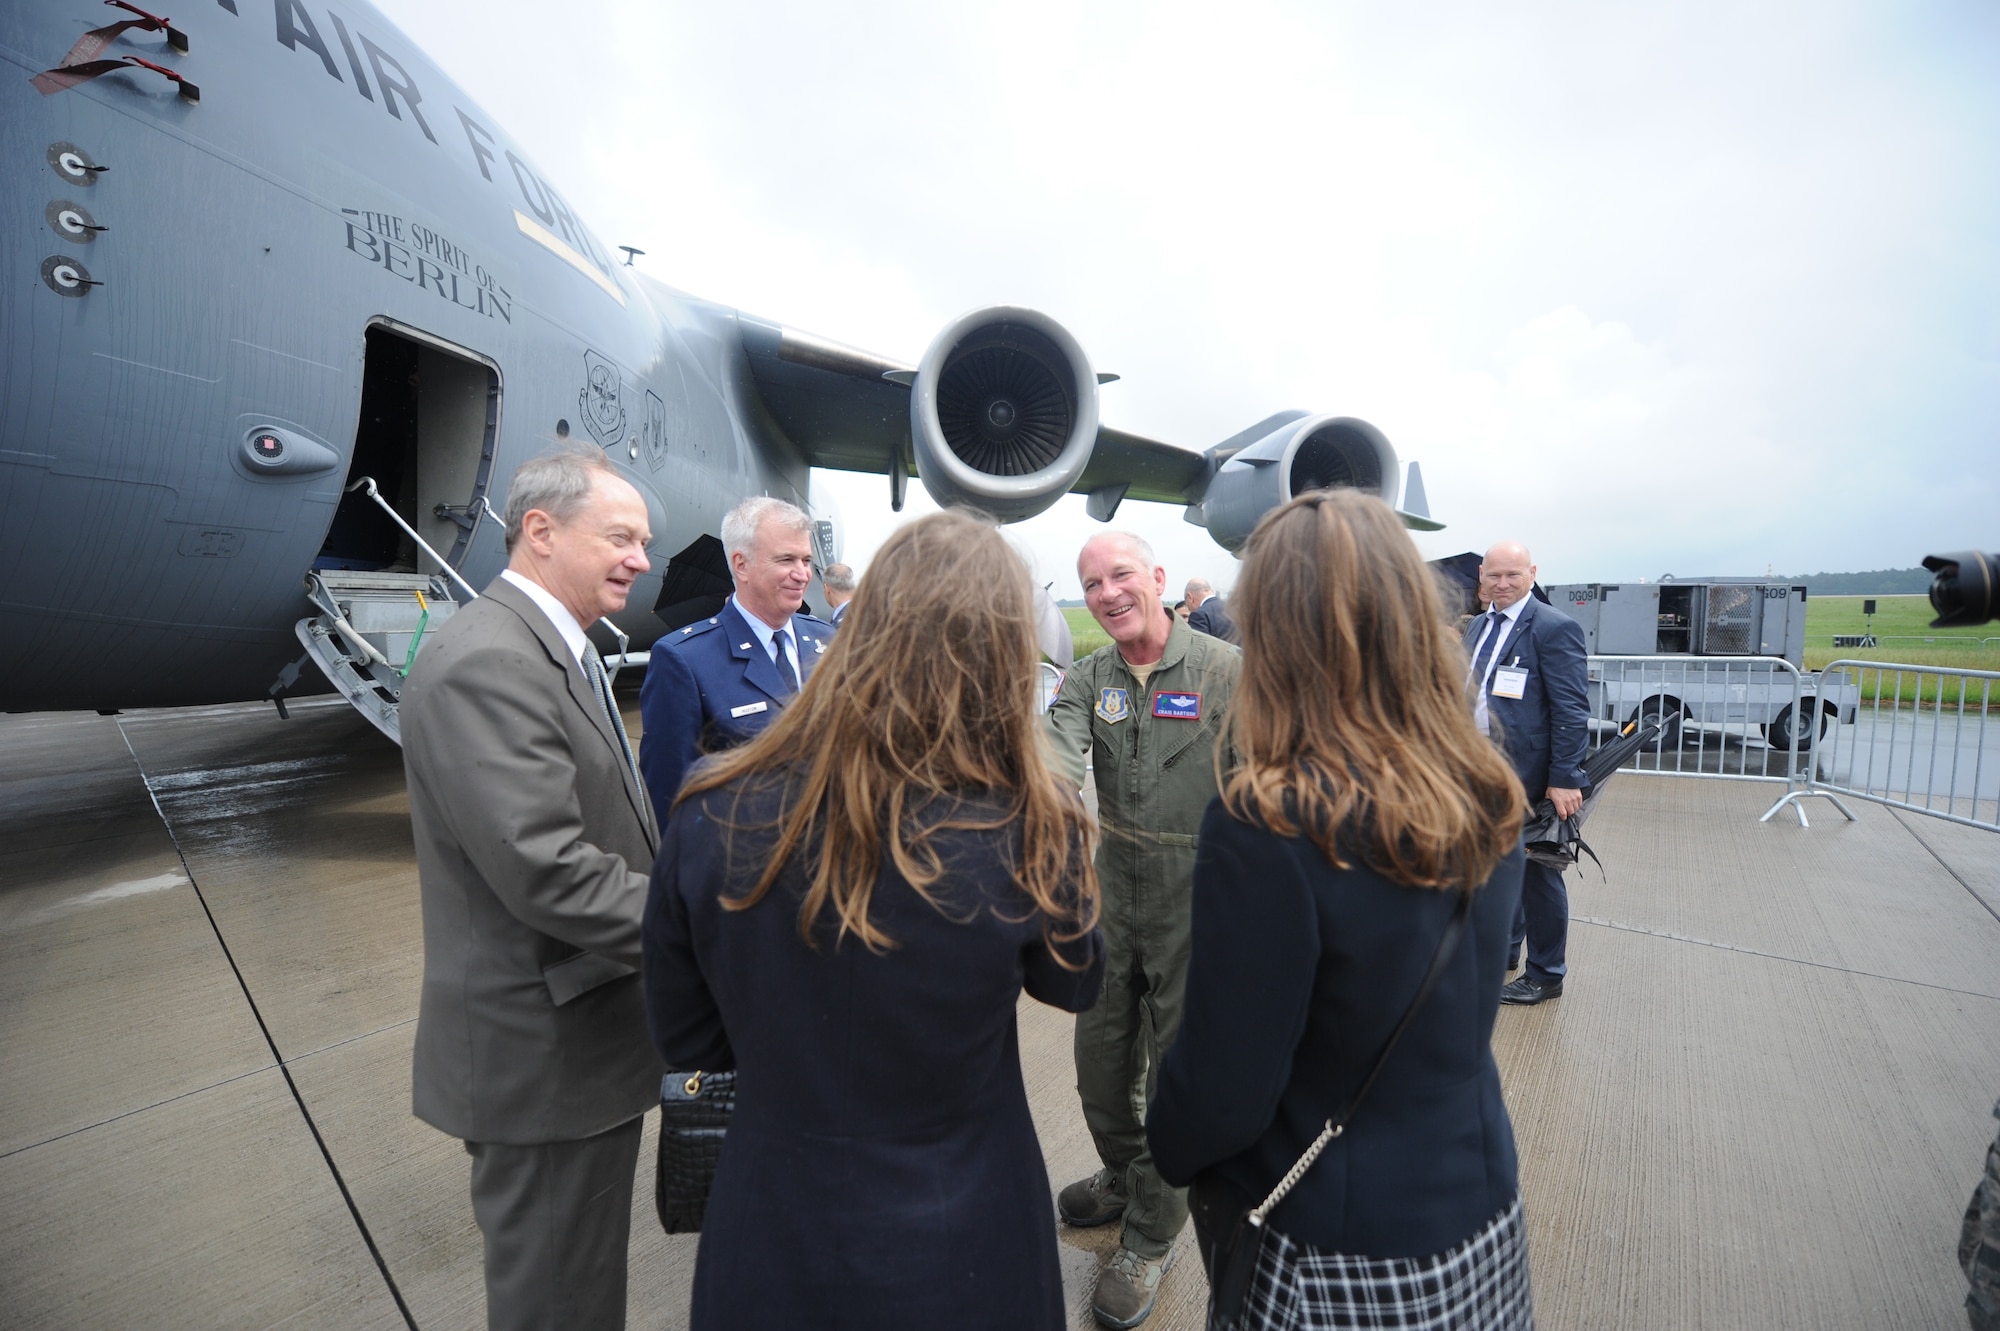 Lt. Col. Craig Bartosh, 701st Airlift Squadron aircraft commander, meets with John B. Emerson, United States Ambassador to Germany, along with his family June 1, 2016, during the 2016 Berlin Air Show. Bartosh, along with the Charleston air crew, gave the ambassador a tour throughout the C-17 Globemaster III entitled, “The Spirit of Berlin.” Emerson was confirmed by the United States Senate on August 1, 2013 as U.S. Ambassador to the Federal Republic of Germany and presented his credentials to German President Joachim Gauck on August 26, 2013.  (U.S. Air Force photo by Senior Airman Tom Brading)